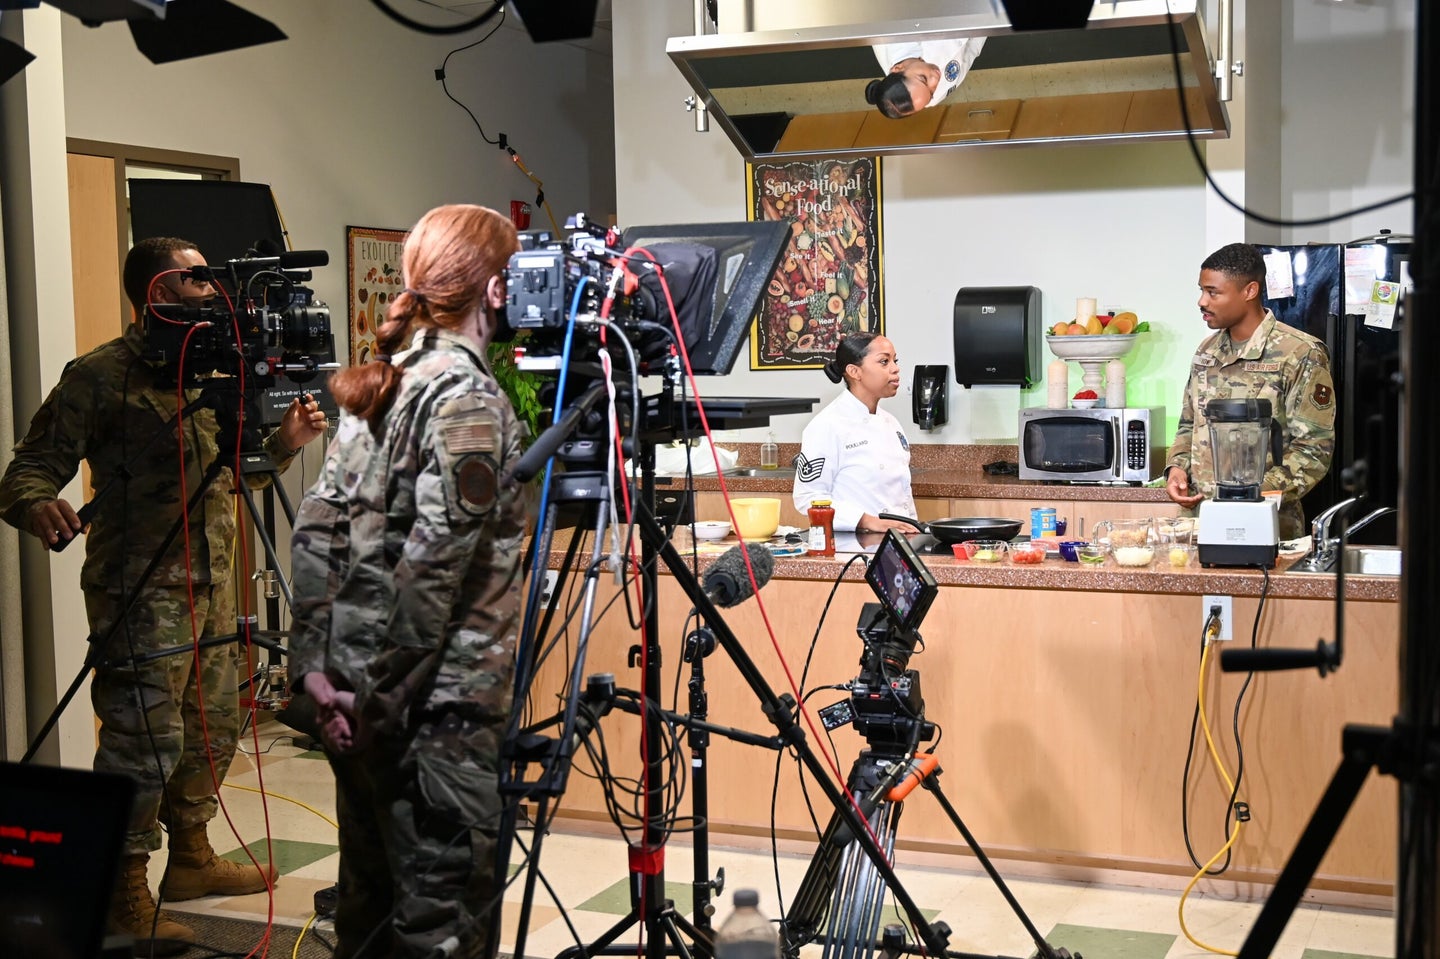 The Air Force Nutrition Service during production of the new Nutrition Kitchen YouTube series. (U.S. Air Force photo by Cynthia Griggs)